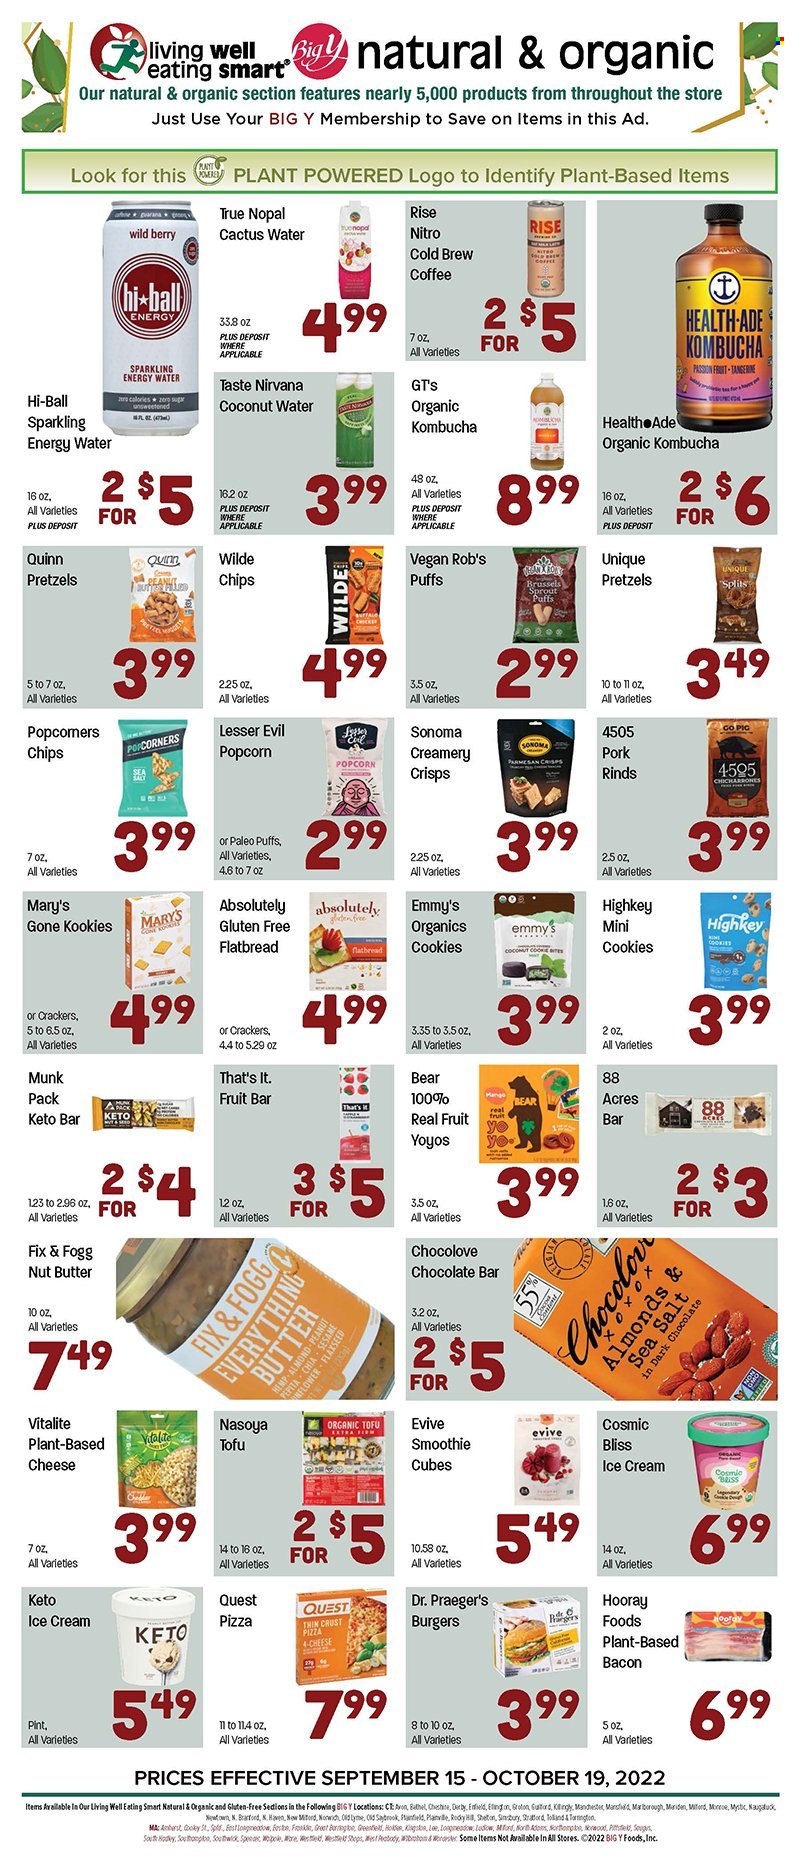 thumbnail - Big Y Flyer - 09/15/2022 - 10/19/2022 - Sales products - pretzels, puffs, mandarines, passion fruit, pizza, hamburger, plant based product, parmesan, tofu, ice cream, Enlightened lce Cream, fruit bar, crackers, chocolate bar, popcorn, salty snack, crisps, nut butter, almonds, coconut water, smoothie, iced coffee, kombucha, coffee drink, Avon. Page 1.